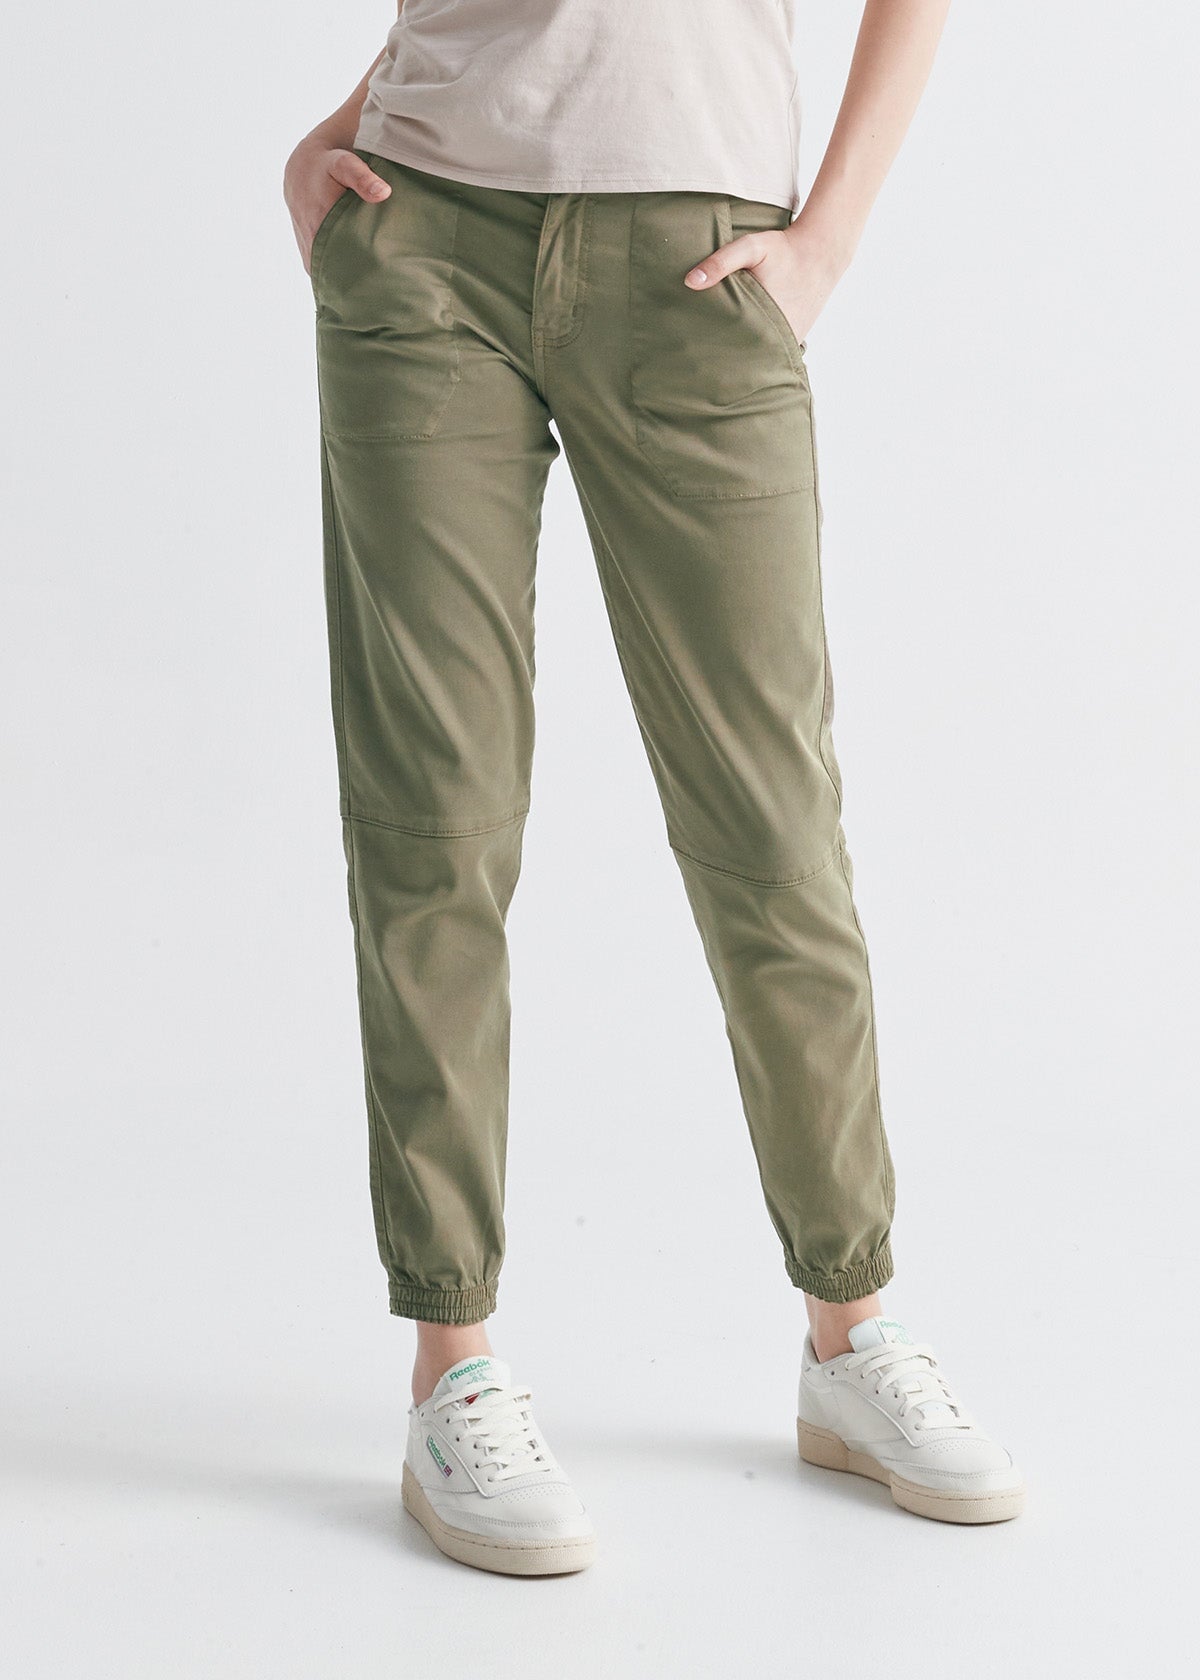 Women's High Rise Green Athletic Jogger